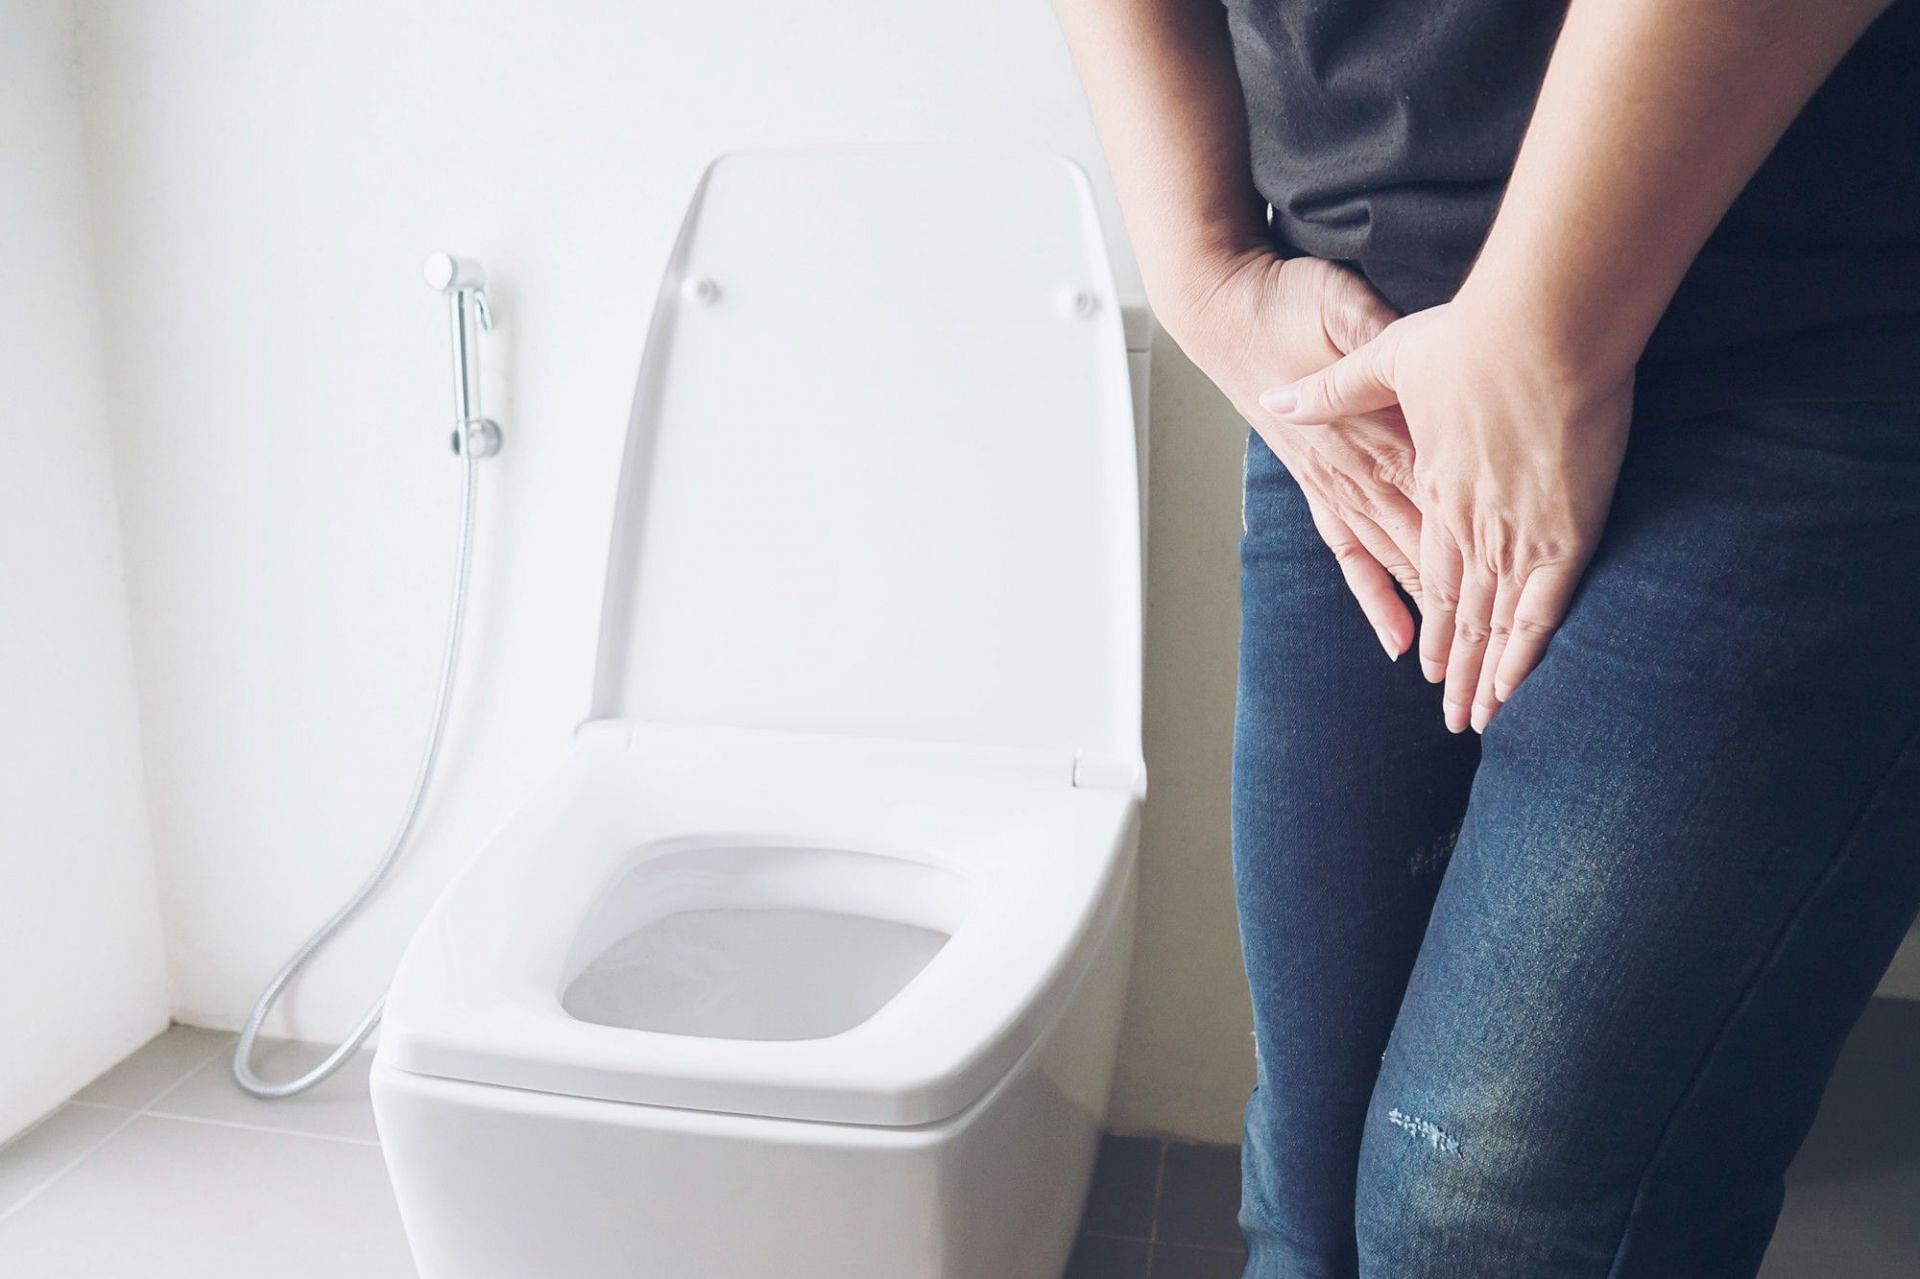 Using mobile on the toilet is a hotbed of germs and bacteria. (Image via Freepik/jcomp)